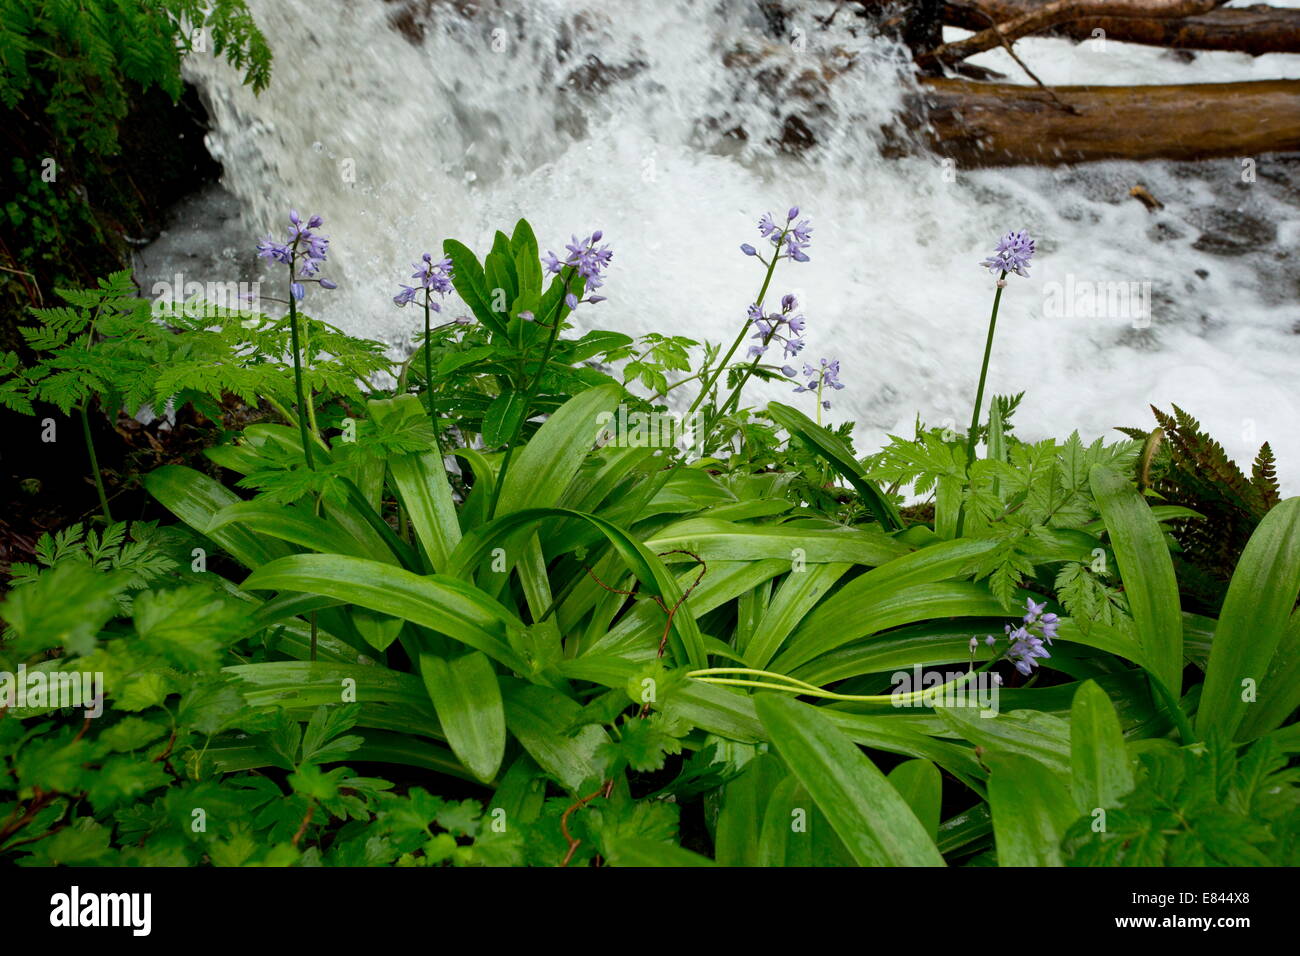 Pyrenean Squill, Scilla lilio-hyacinthus by a stream in woodland in spring, french Pyrenees. France. Stock Photo